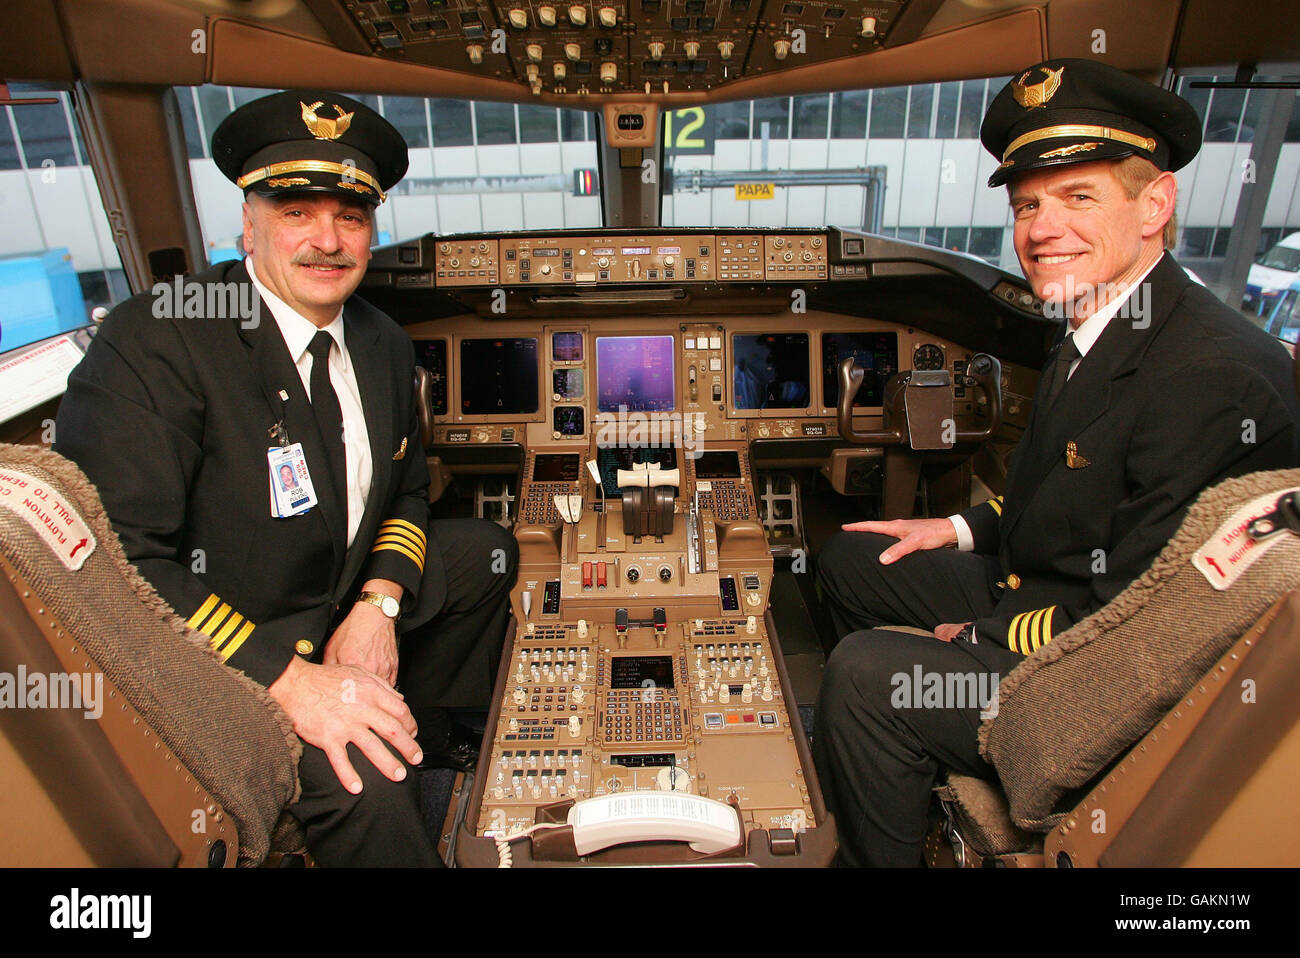 Captain Rob Pulino, left, and First Officer TJ Mearsheimer on the flight deck of Continental Airlines flight CO28 after it arrived at London's Heathrow Airport from New York this morning, making it the first plane to land at Heathrow under the new Open Skies agreement between the US and the European Union. Stock Photo